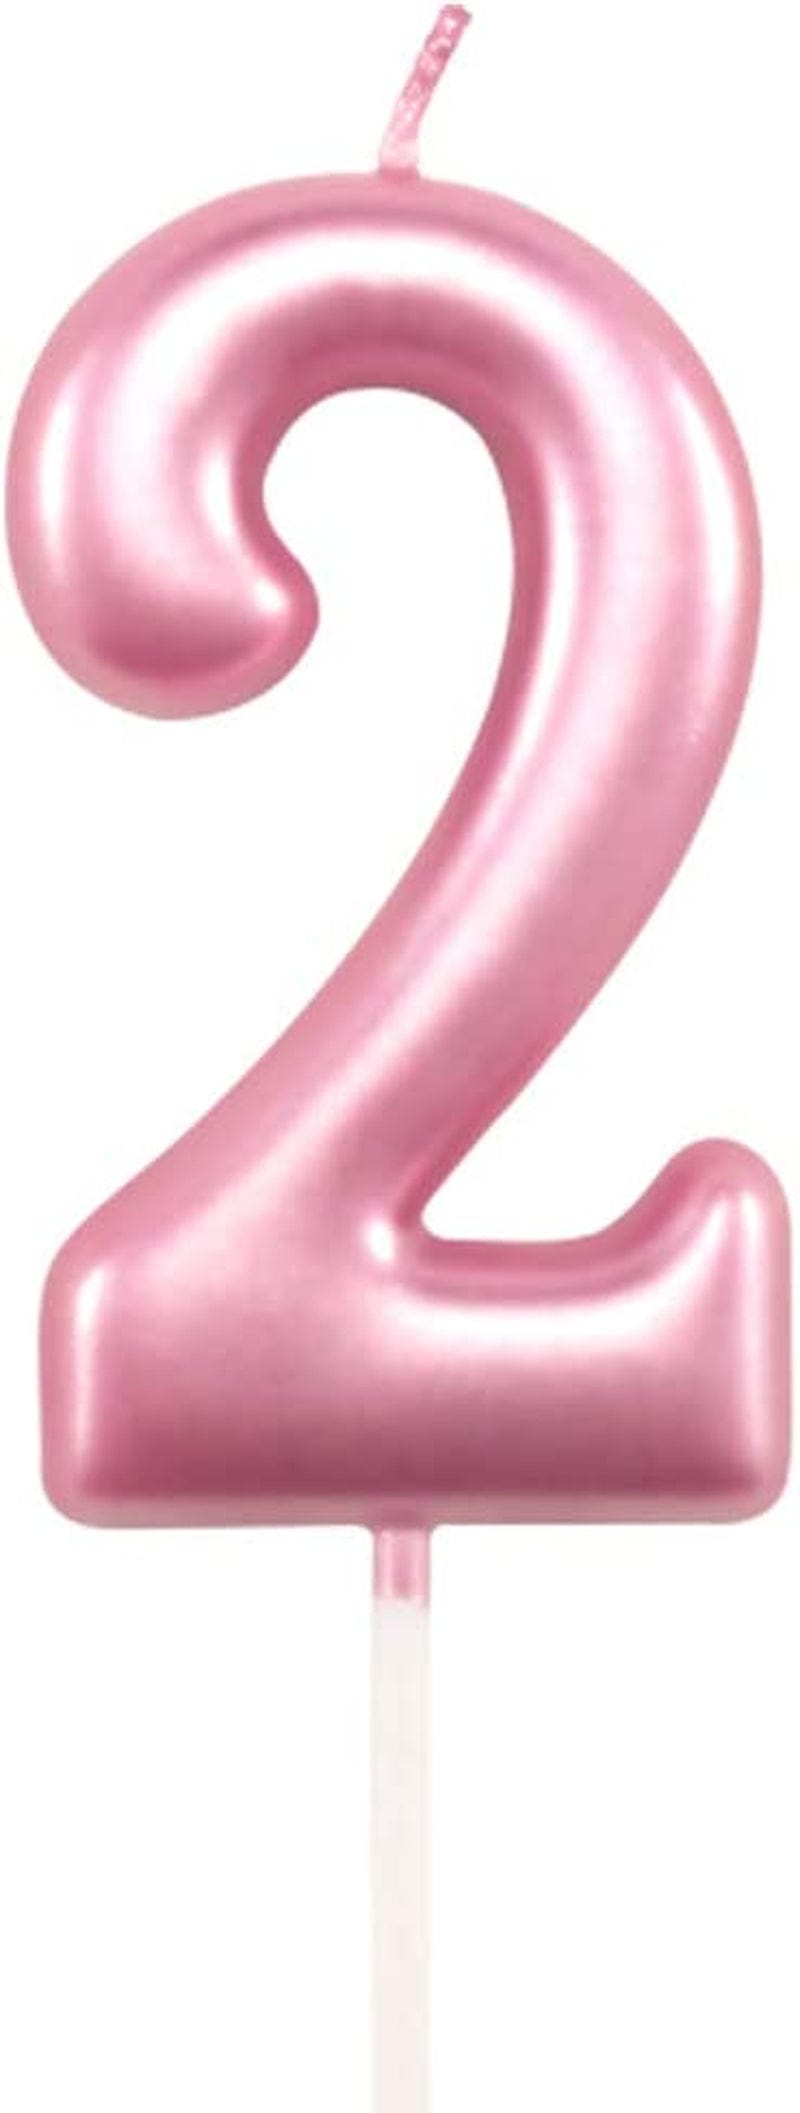 1St Birthday Candle First Year Pink Happy Birthday Number One Candles for Cake Topper Decoration for Party Kids Adults Numeral 1 10 100 11 21 16 14 12 18 13 11 91